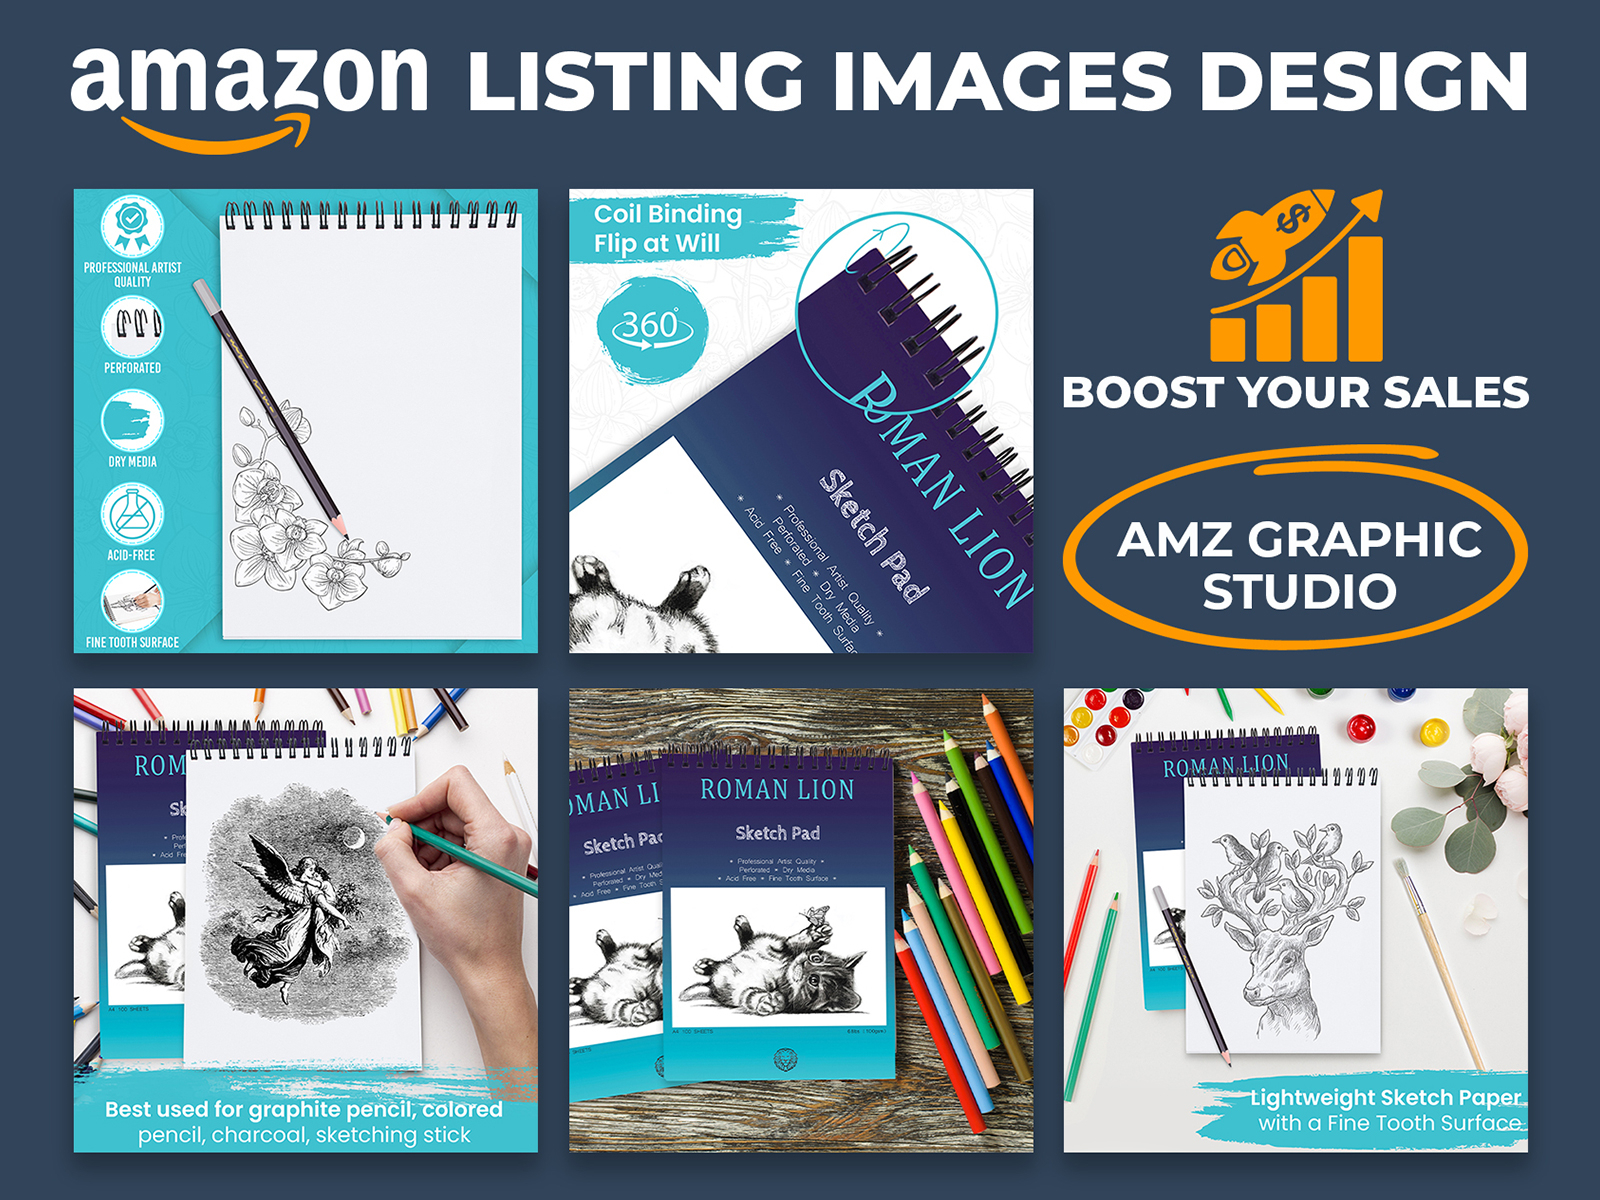 Sketch Pad - Amazon Product Listing Images Design by AMZ Graphic Studio ...